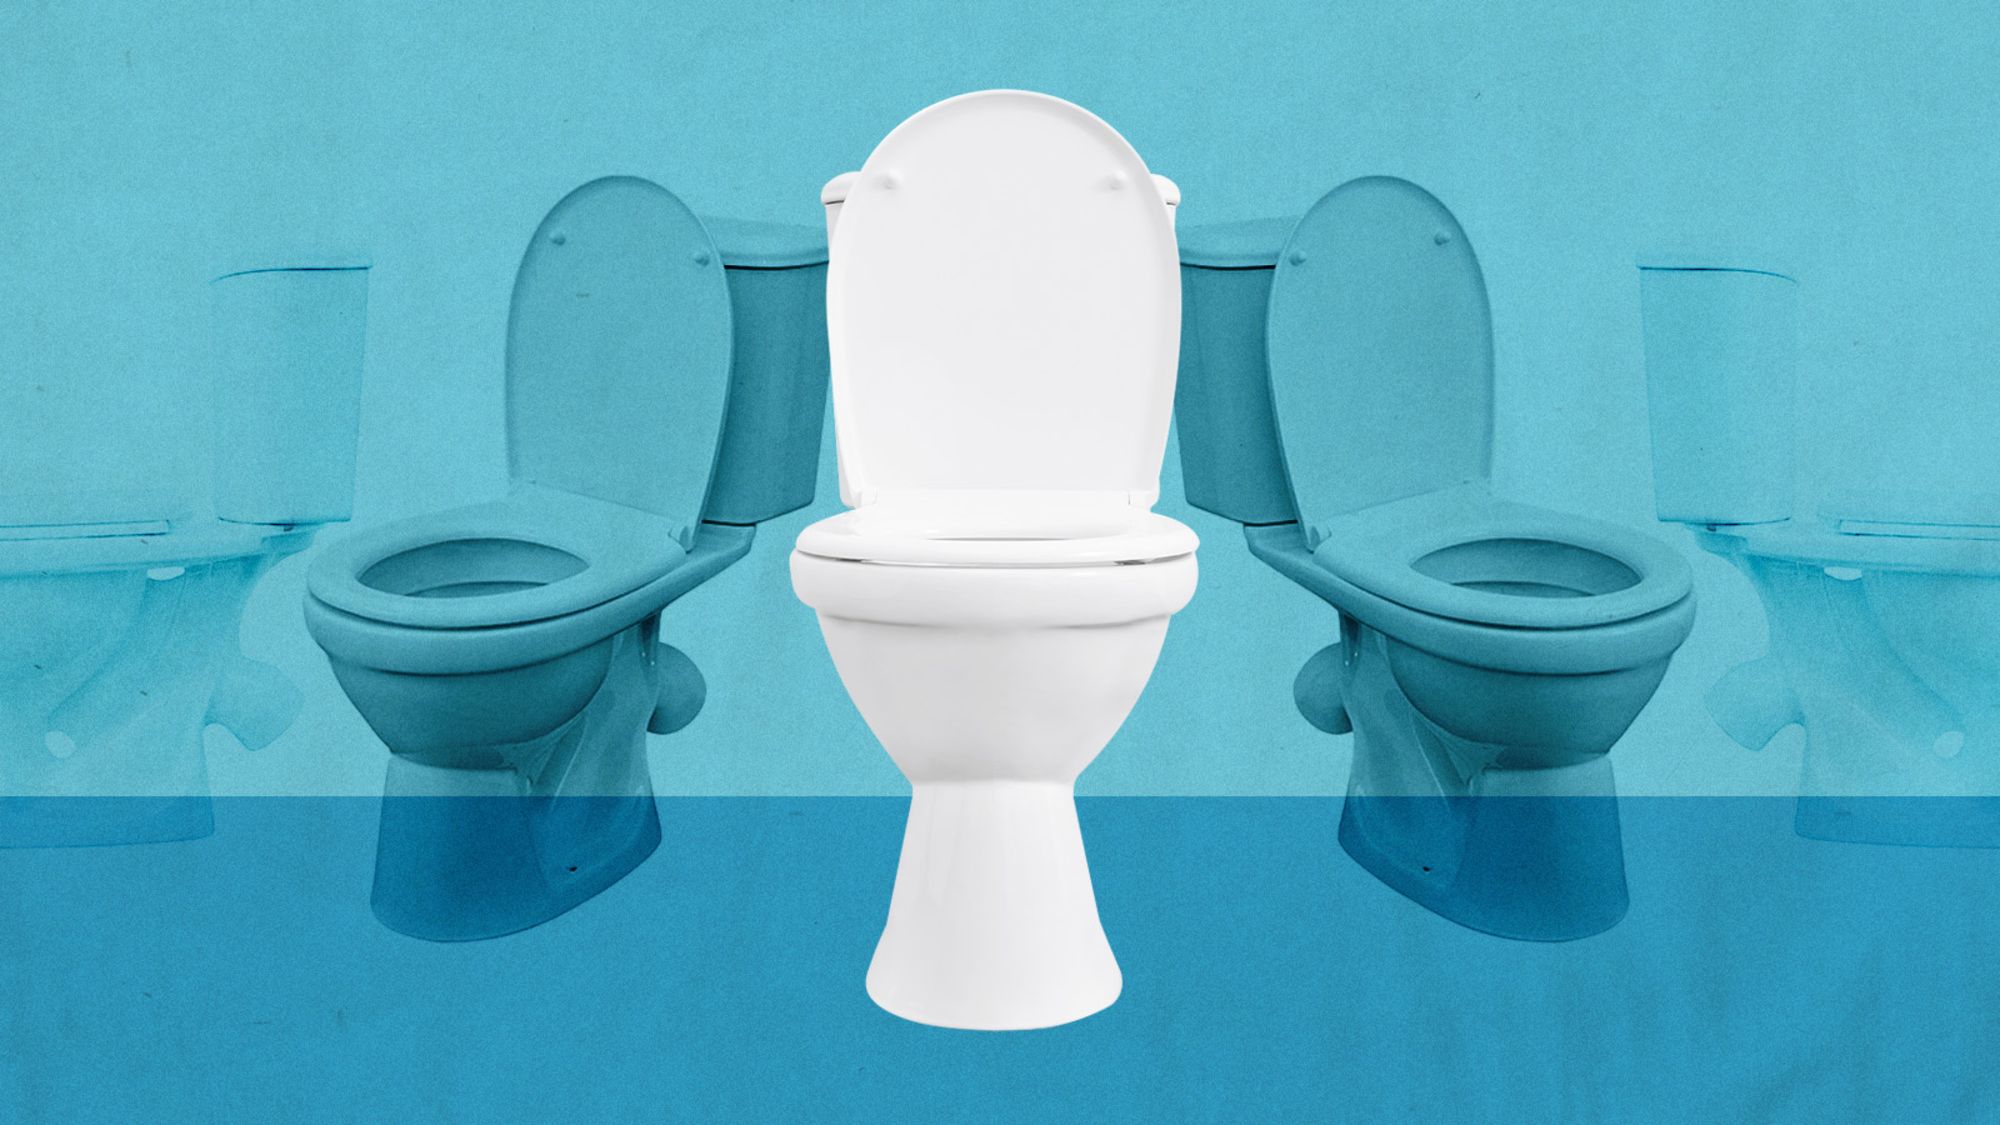 Our familiar porcelain companion is a wasteful one — and one that could be so much more.